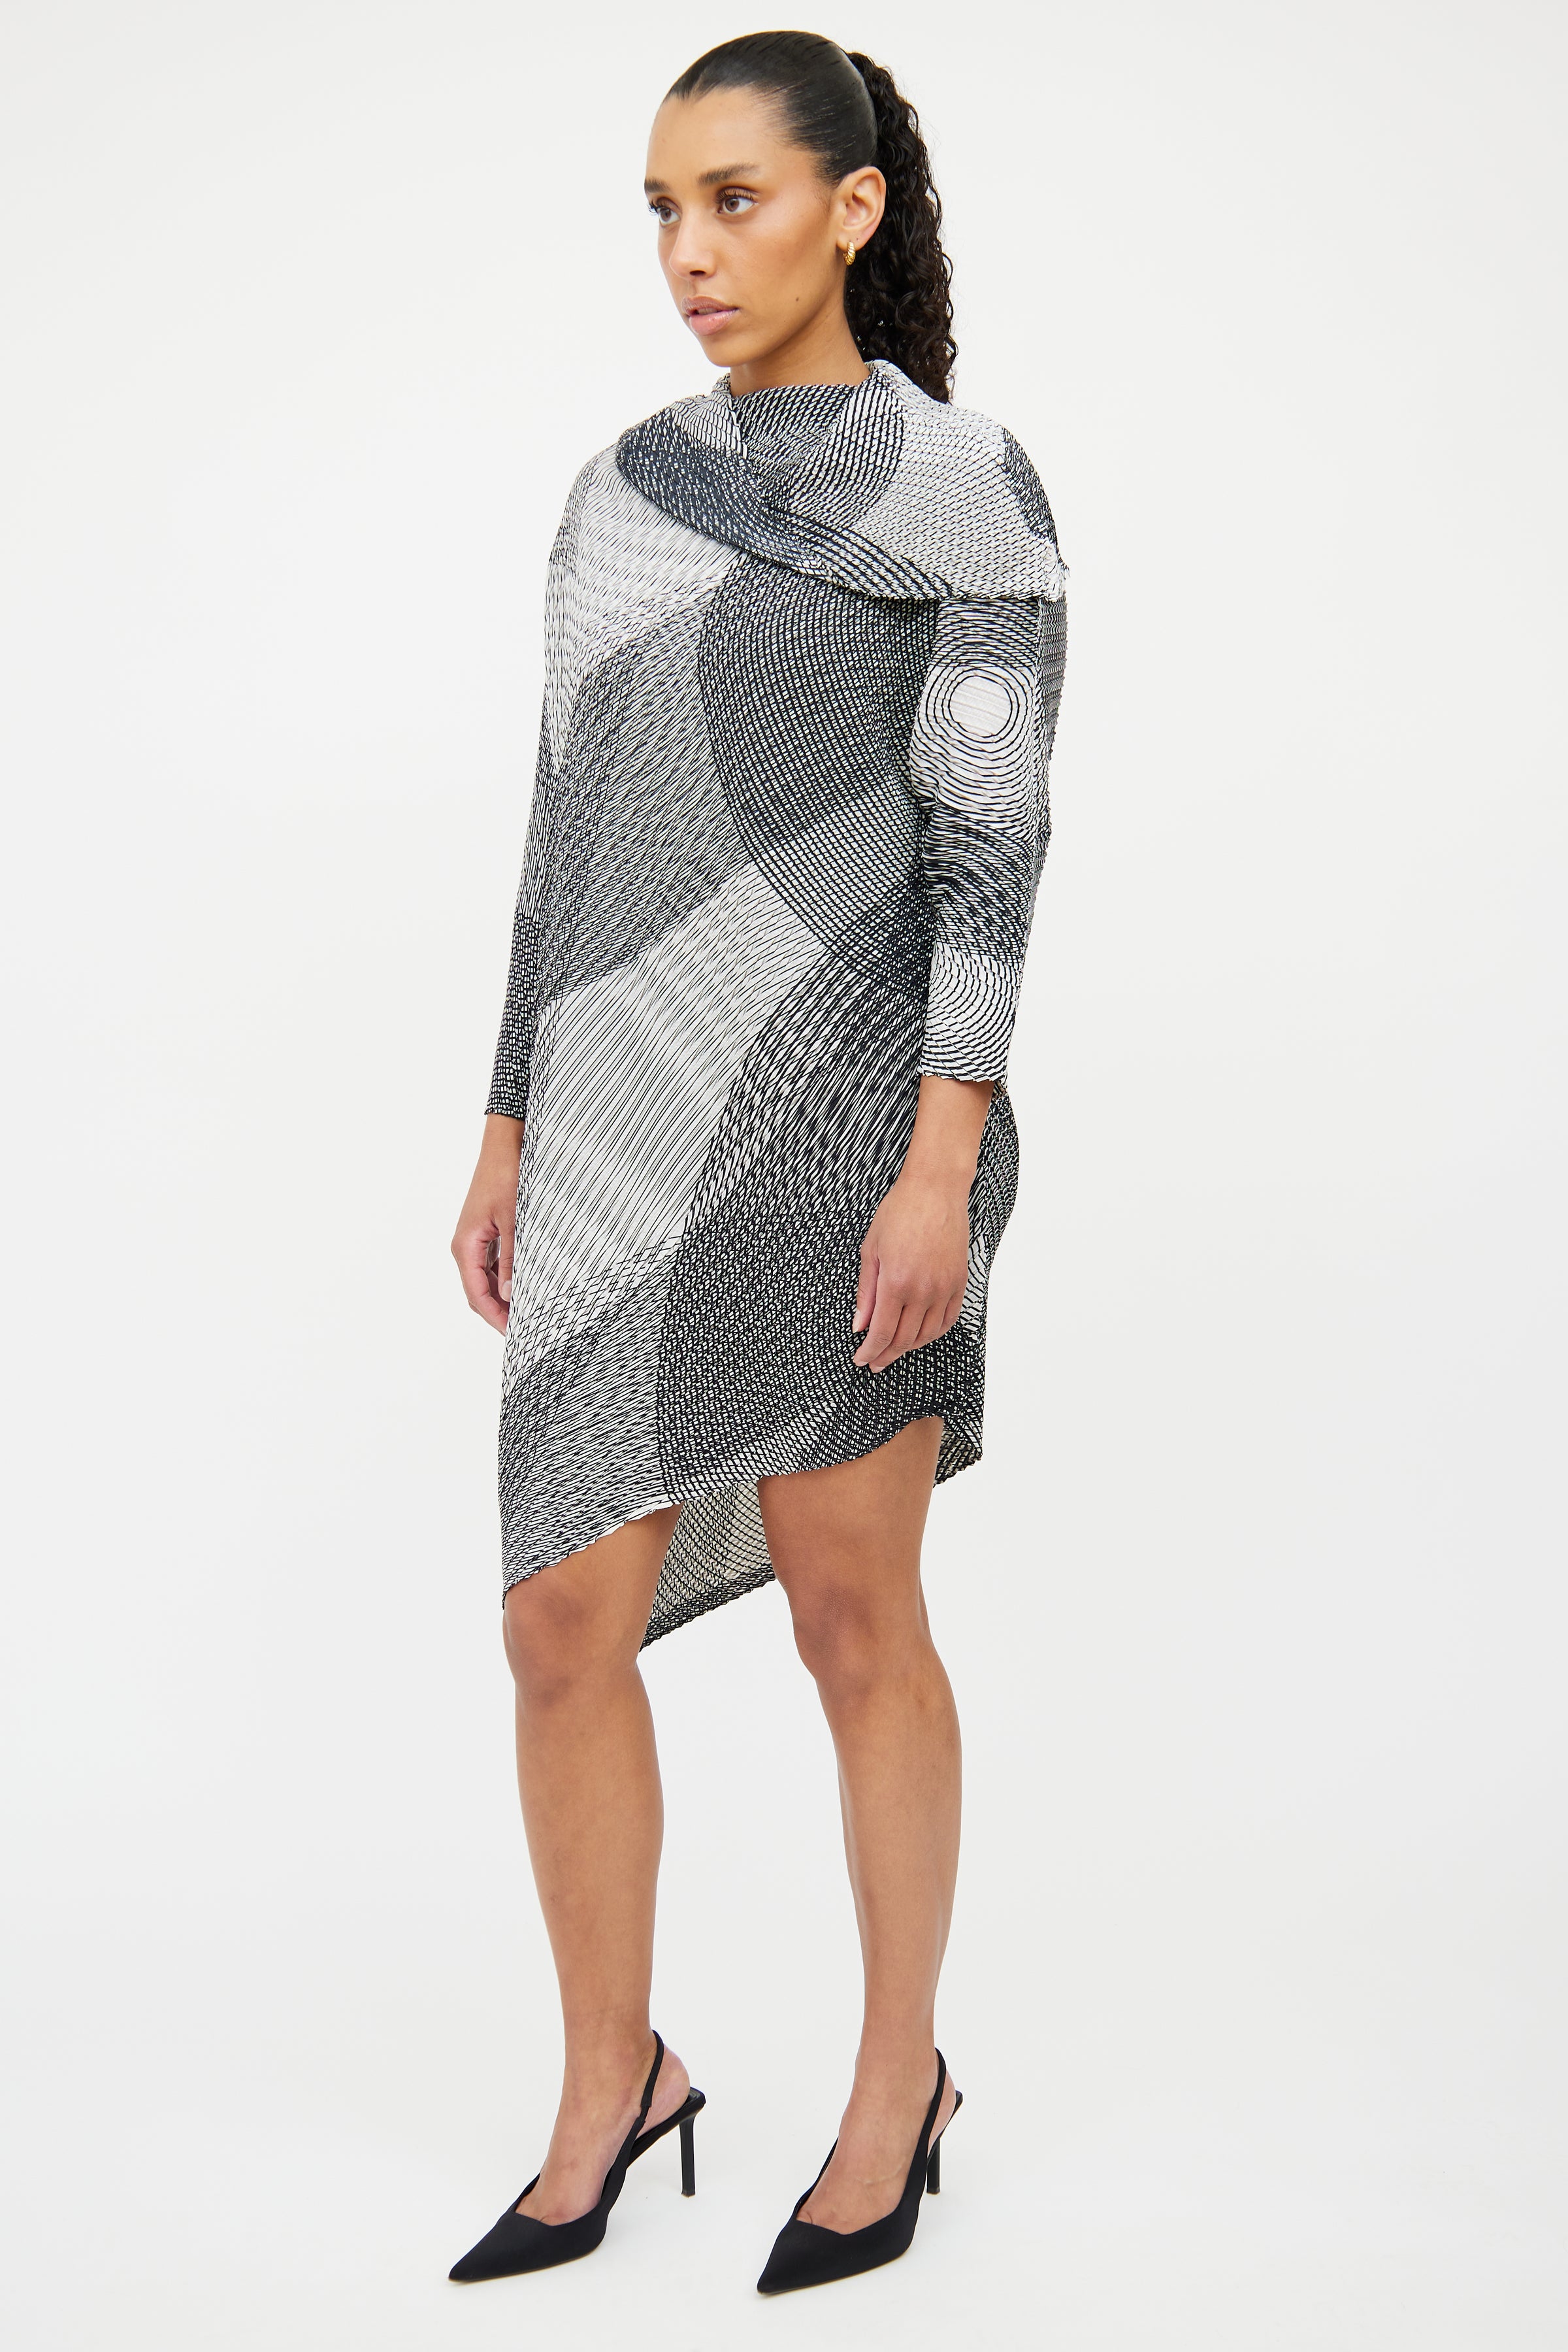 Pleats Please Issey Miyake // Black & White Pleated Dress – VSP Consignment